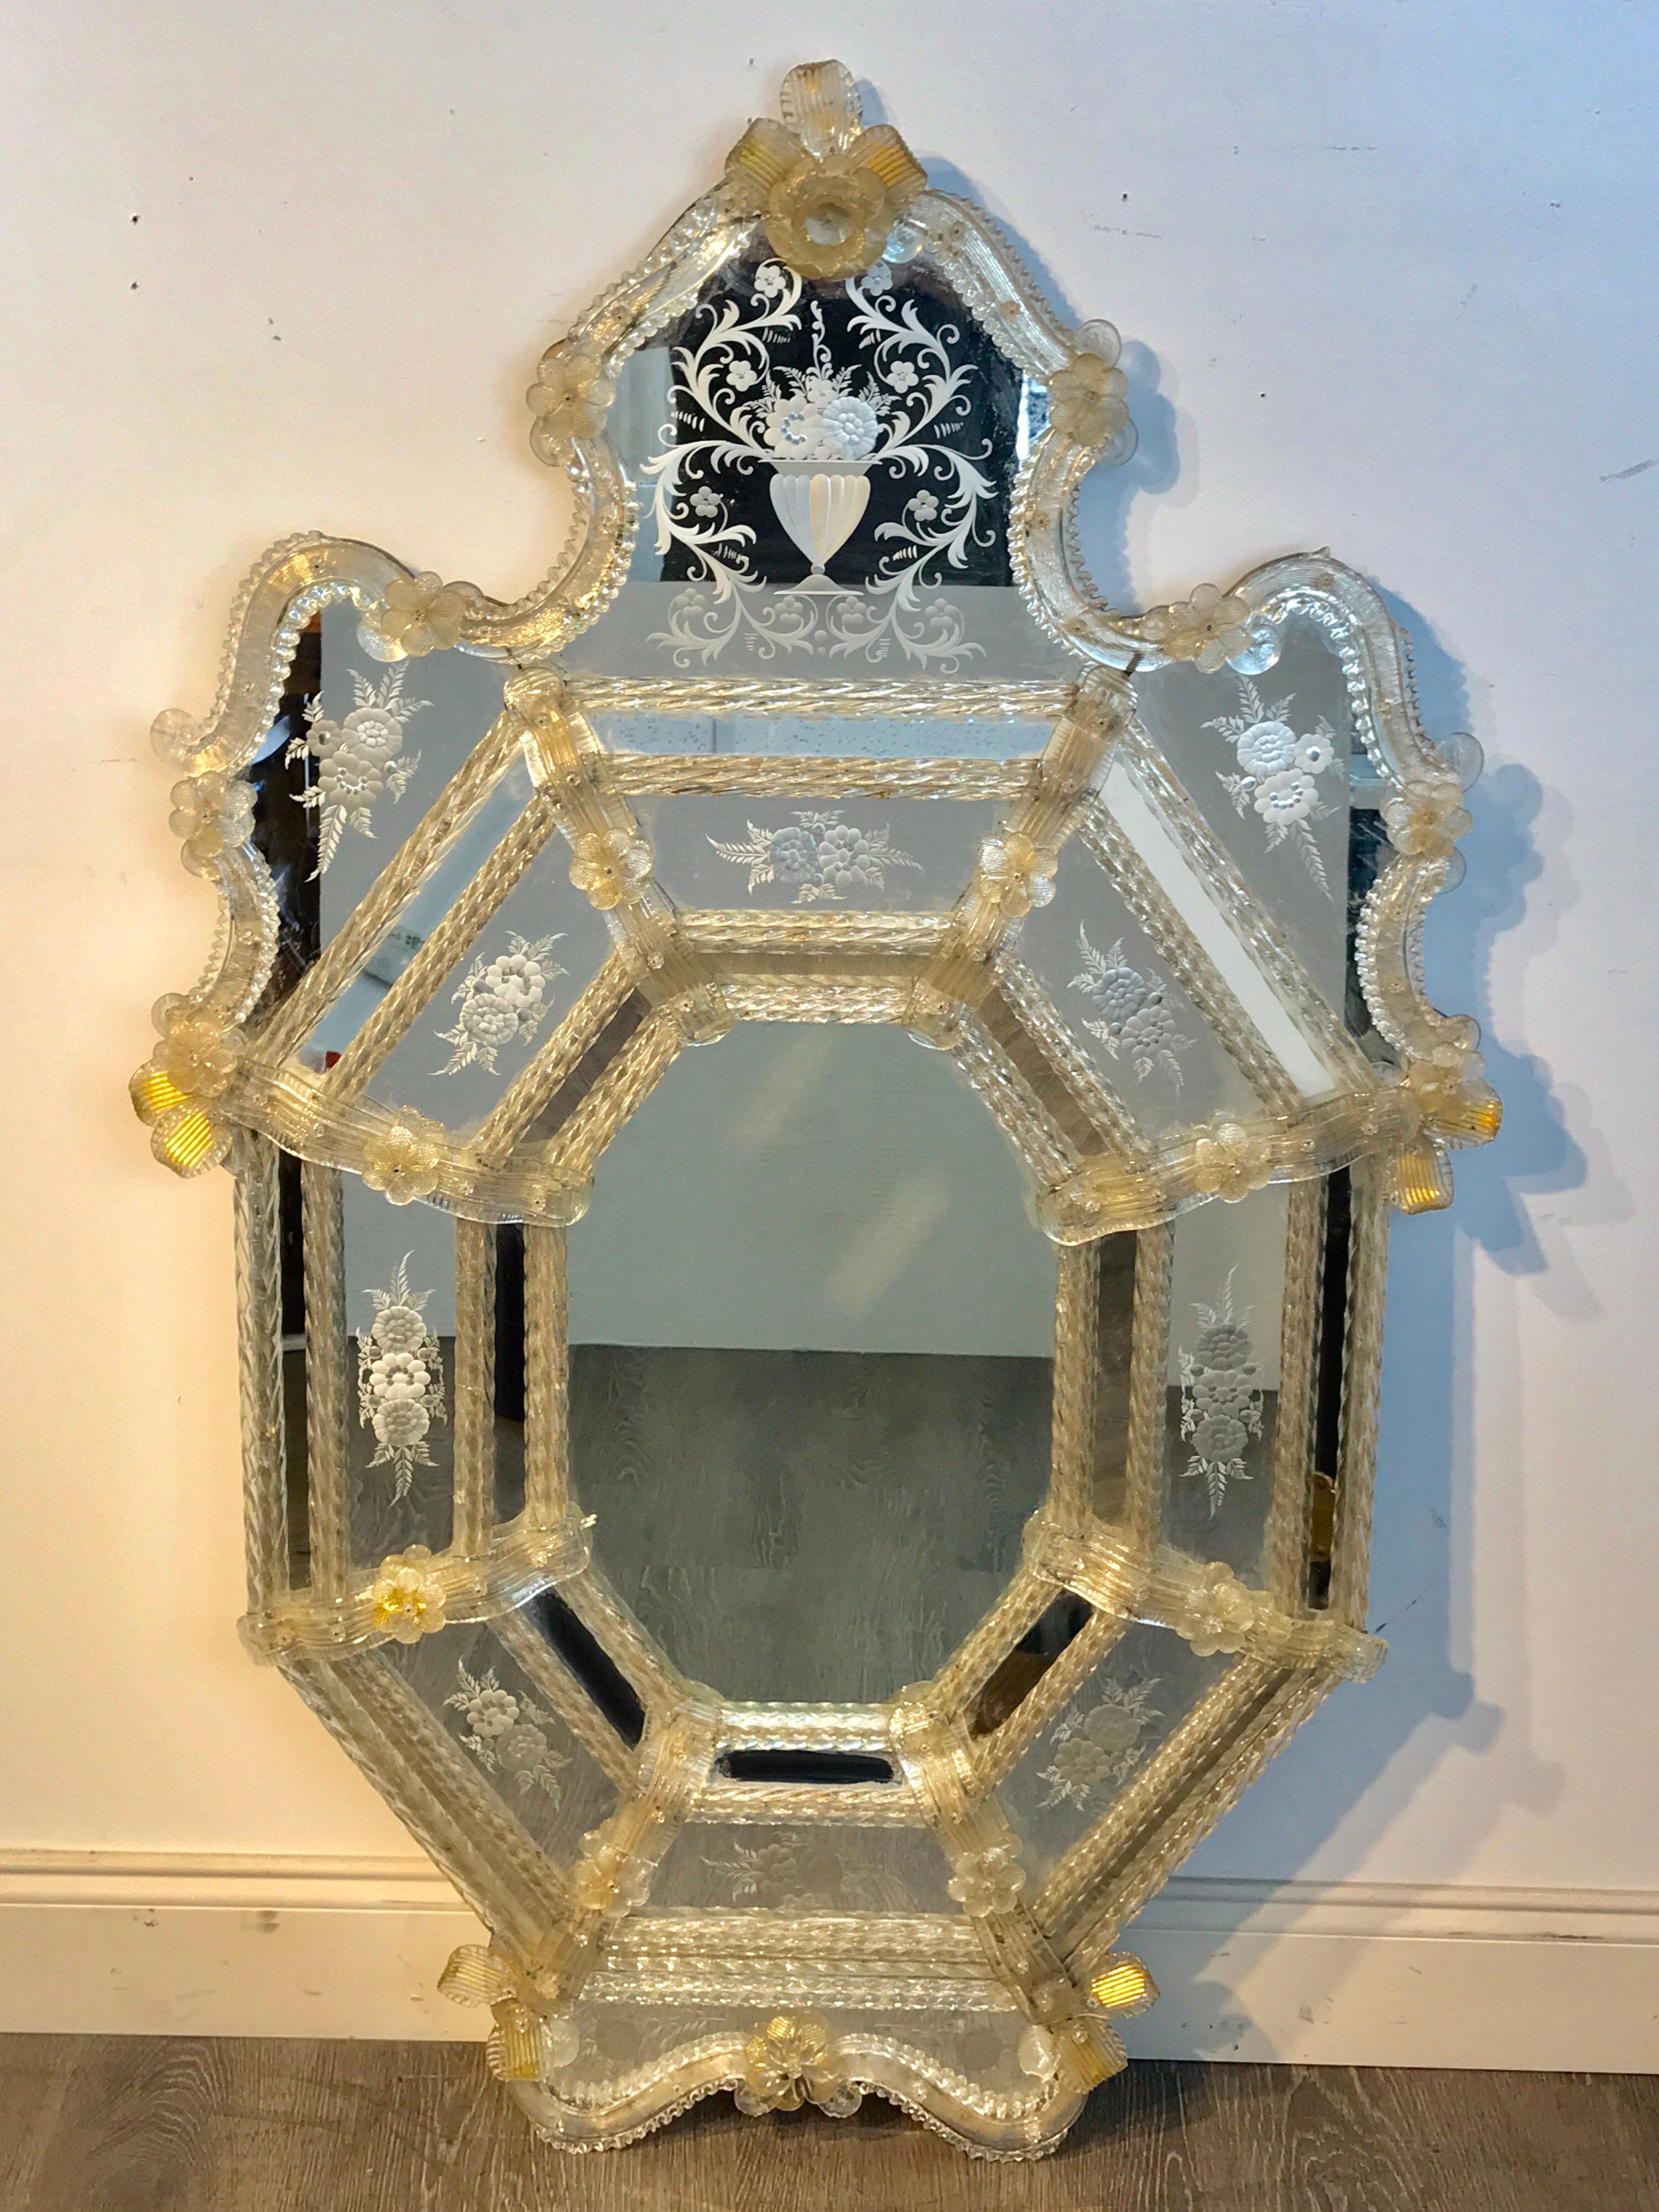 Exquisite Venetian glass engraved mirror, of typical form with with applied glass decoration and finely engraved mirror detail, the center mirror measures 12